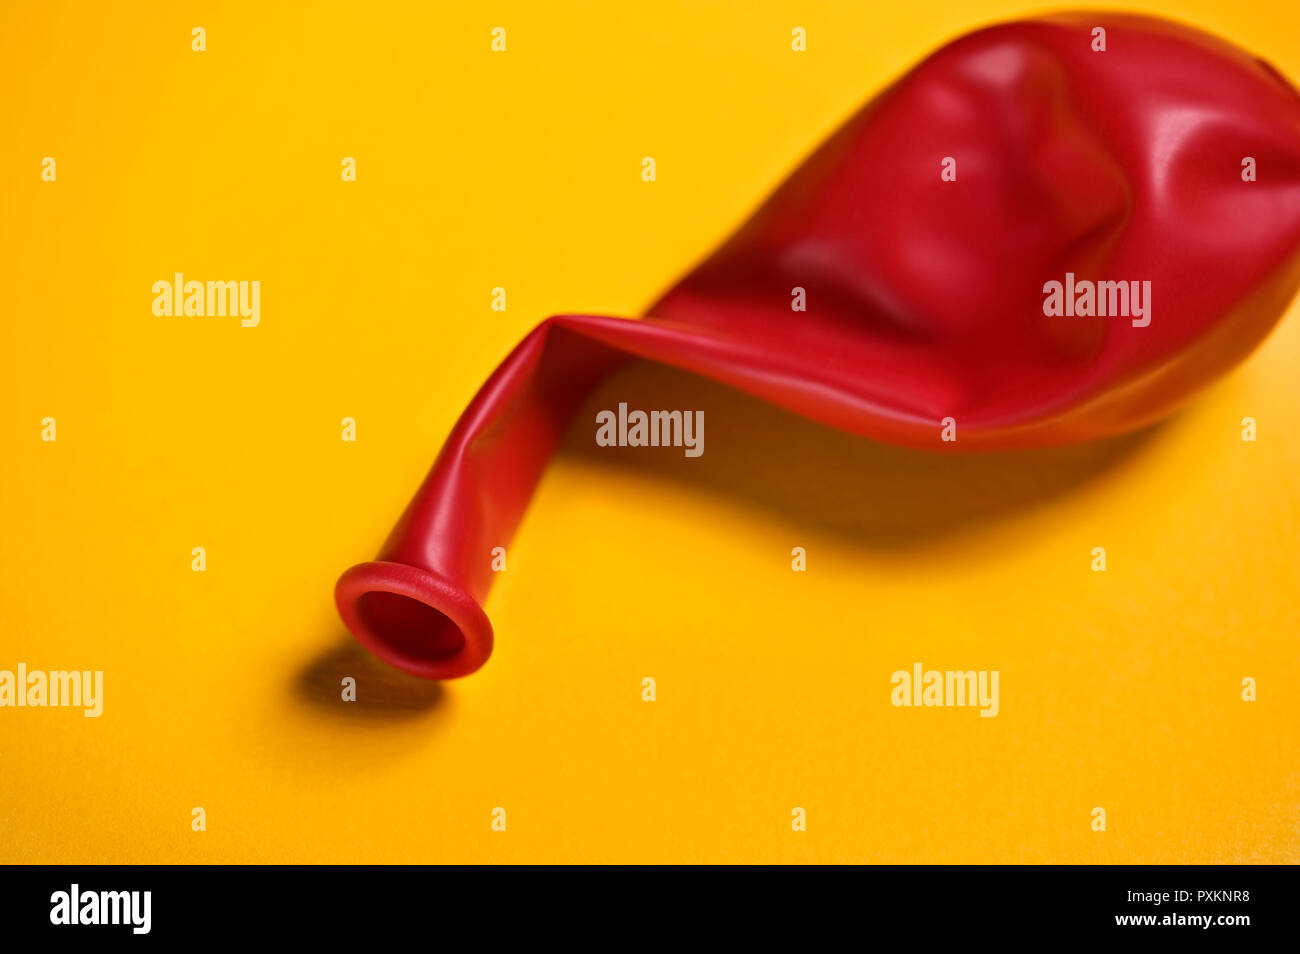 A red balloon on a yellow background Stock Photo